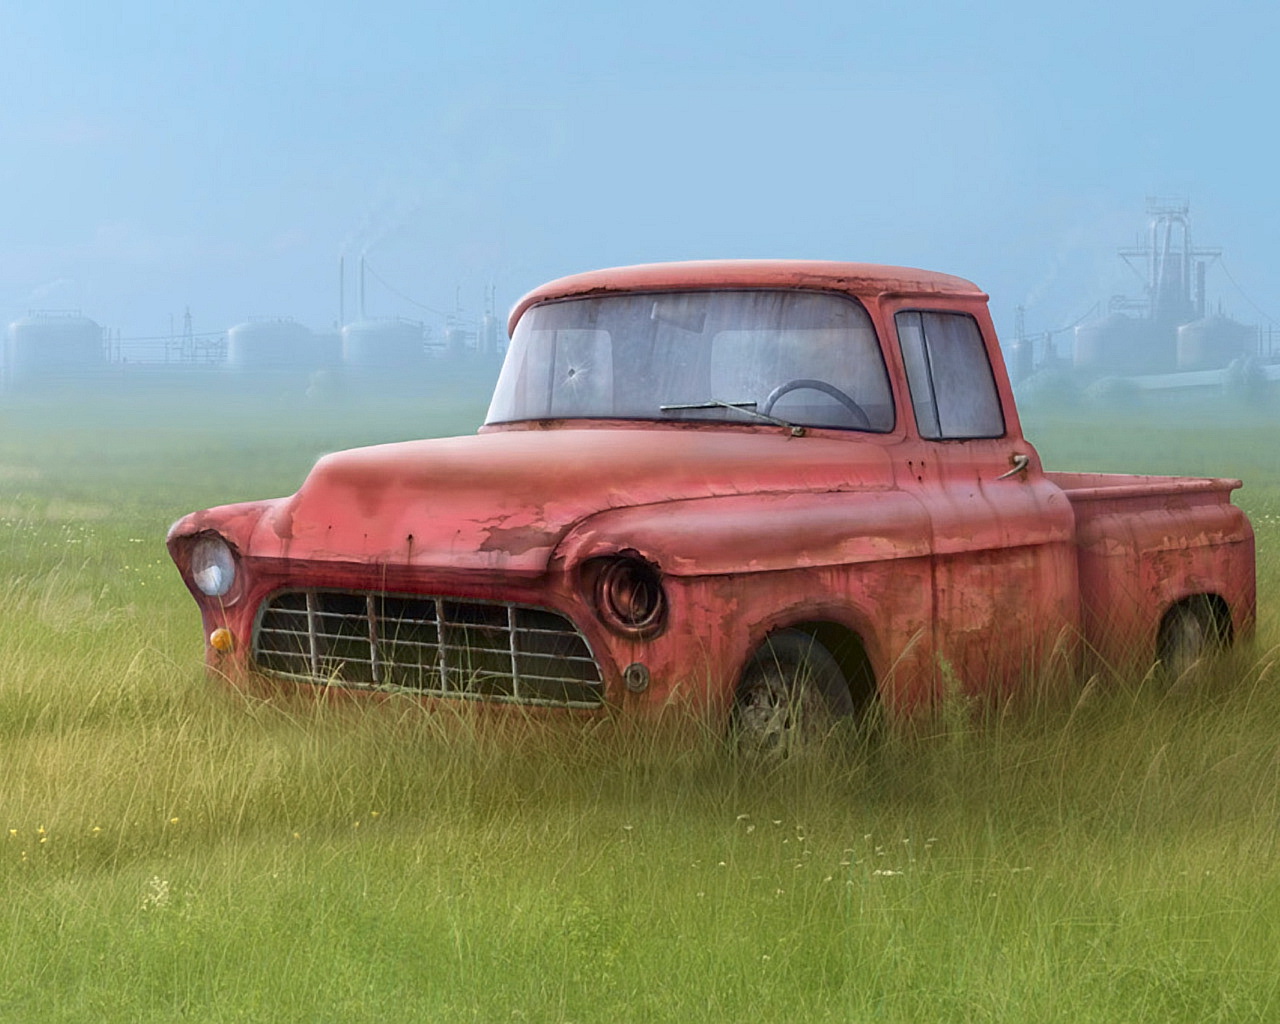 Old Car In The Grass   1280x1024   54